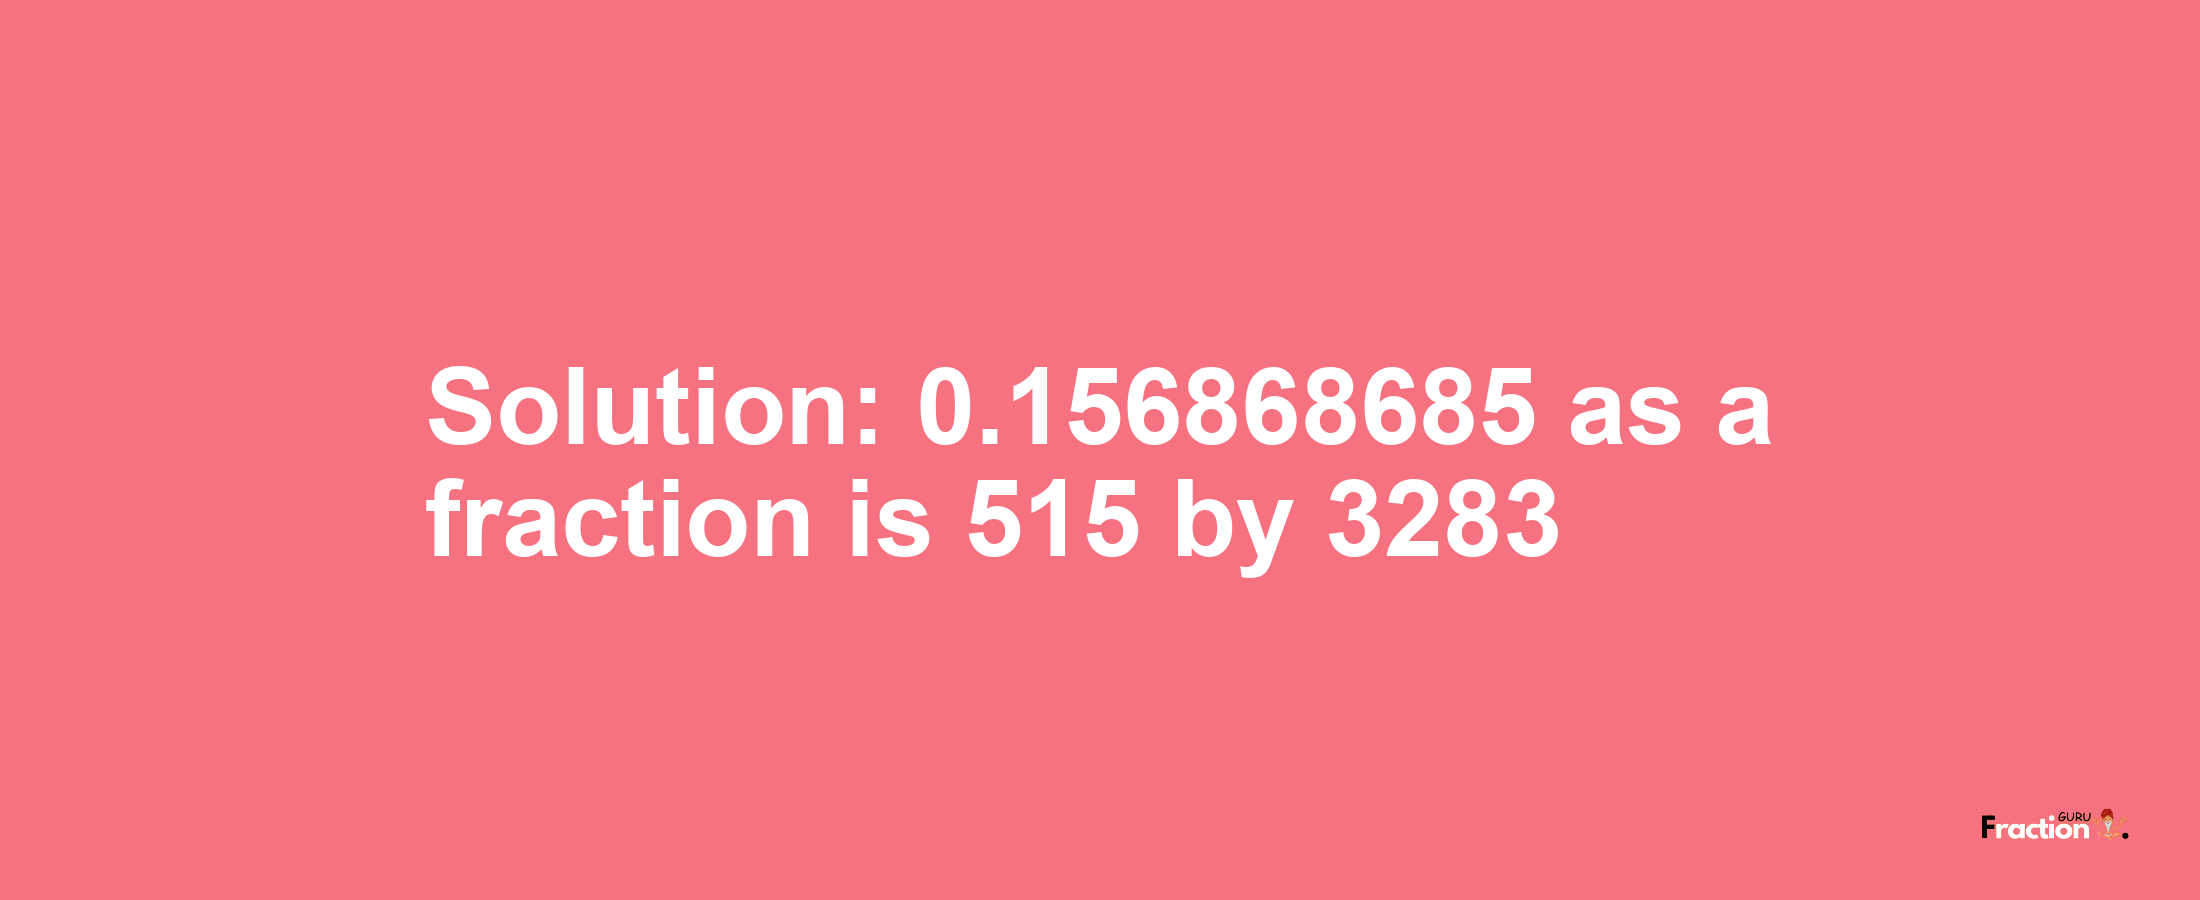 Solution:0.156868685 as a fraction is 515/3283